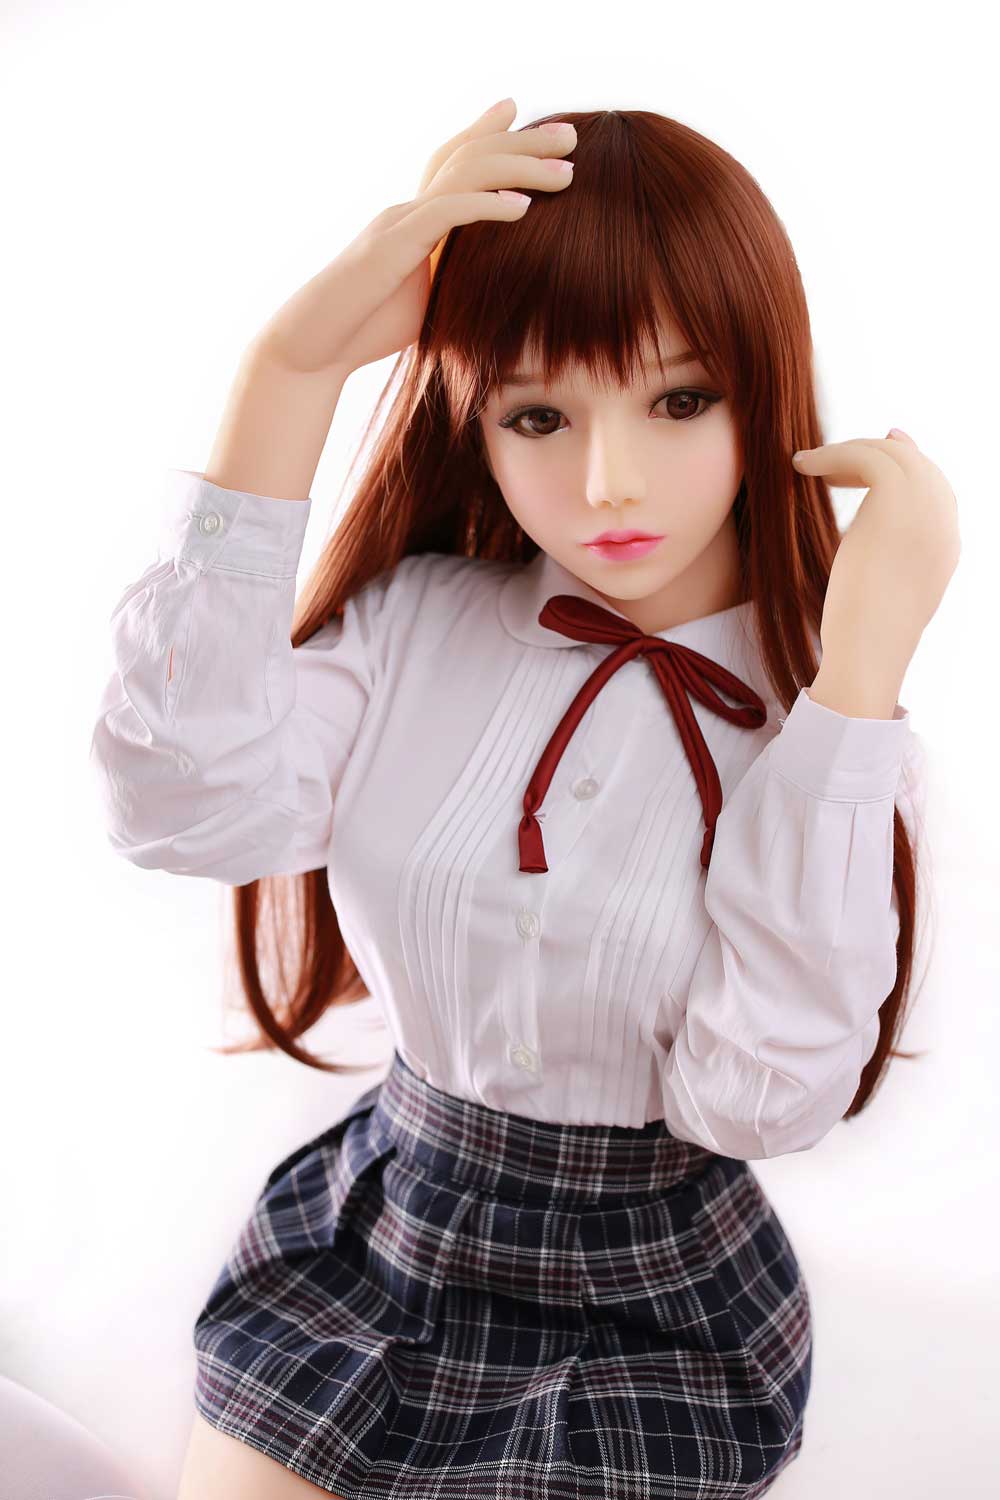 Mini sex doll with hand touching hair